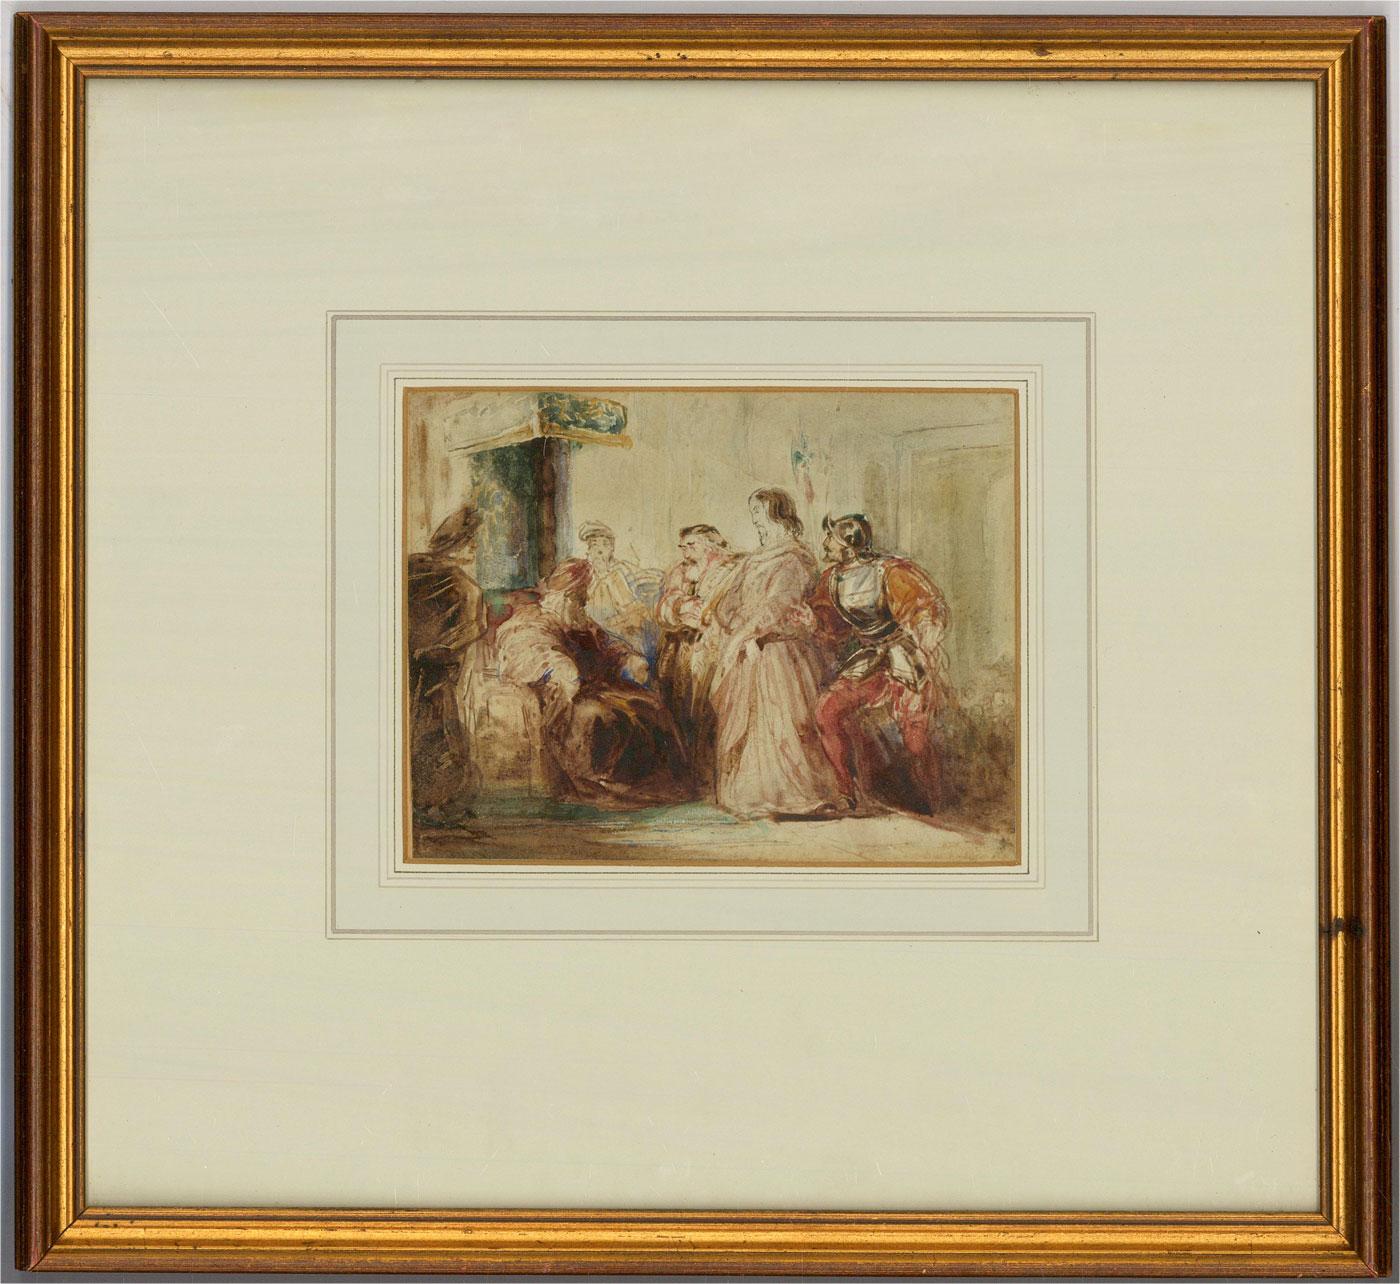 A Shakespearean scene similar to others by the artist featuring a king being approached by various figures. Well presented in a white mount and gilt frame. Unsigned. On wove.







